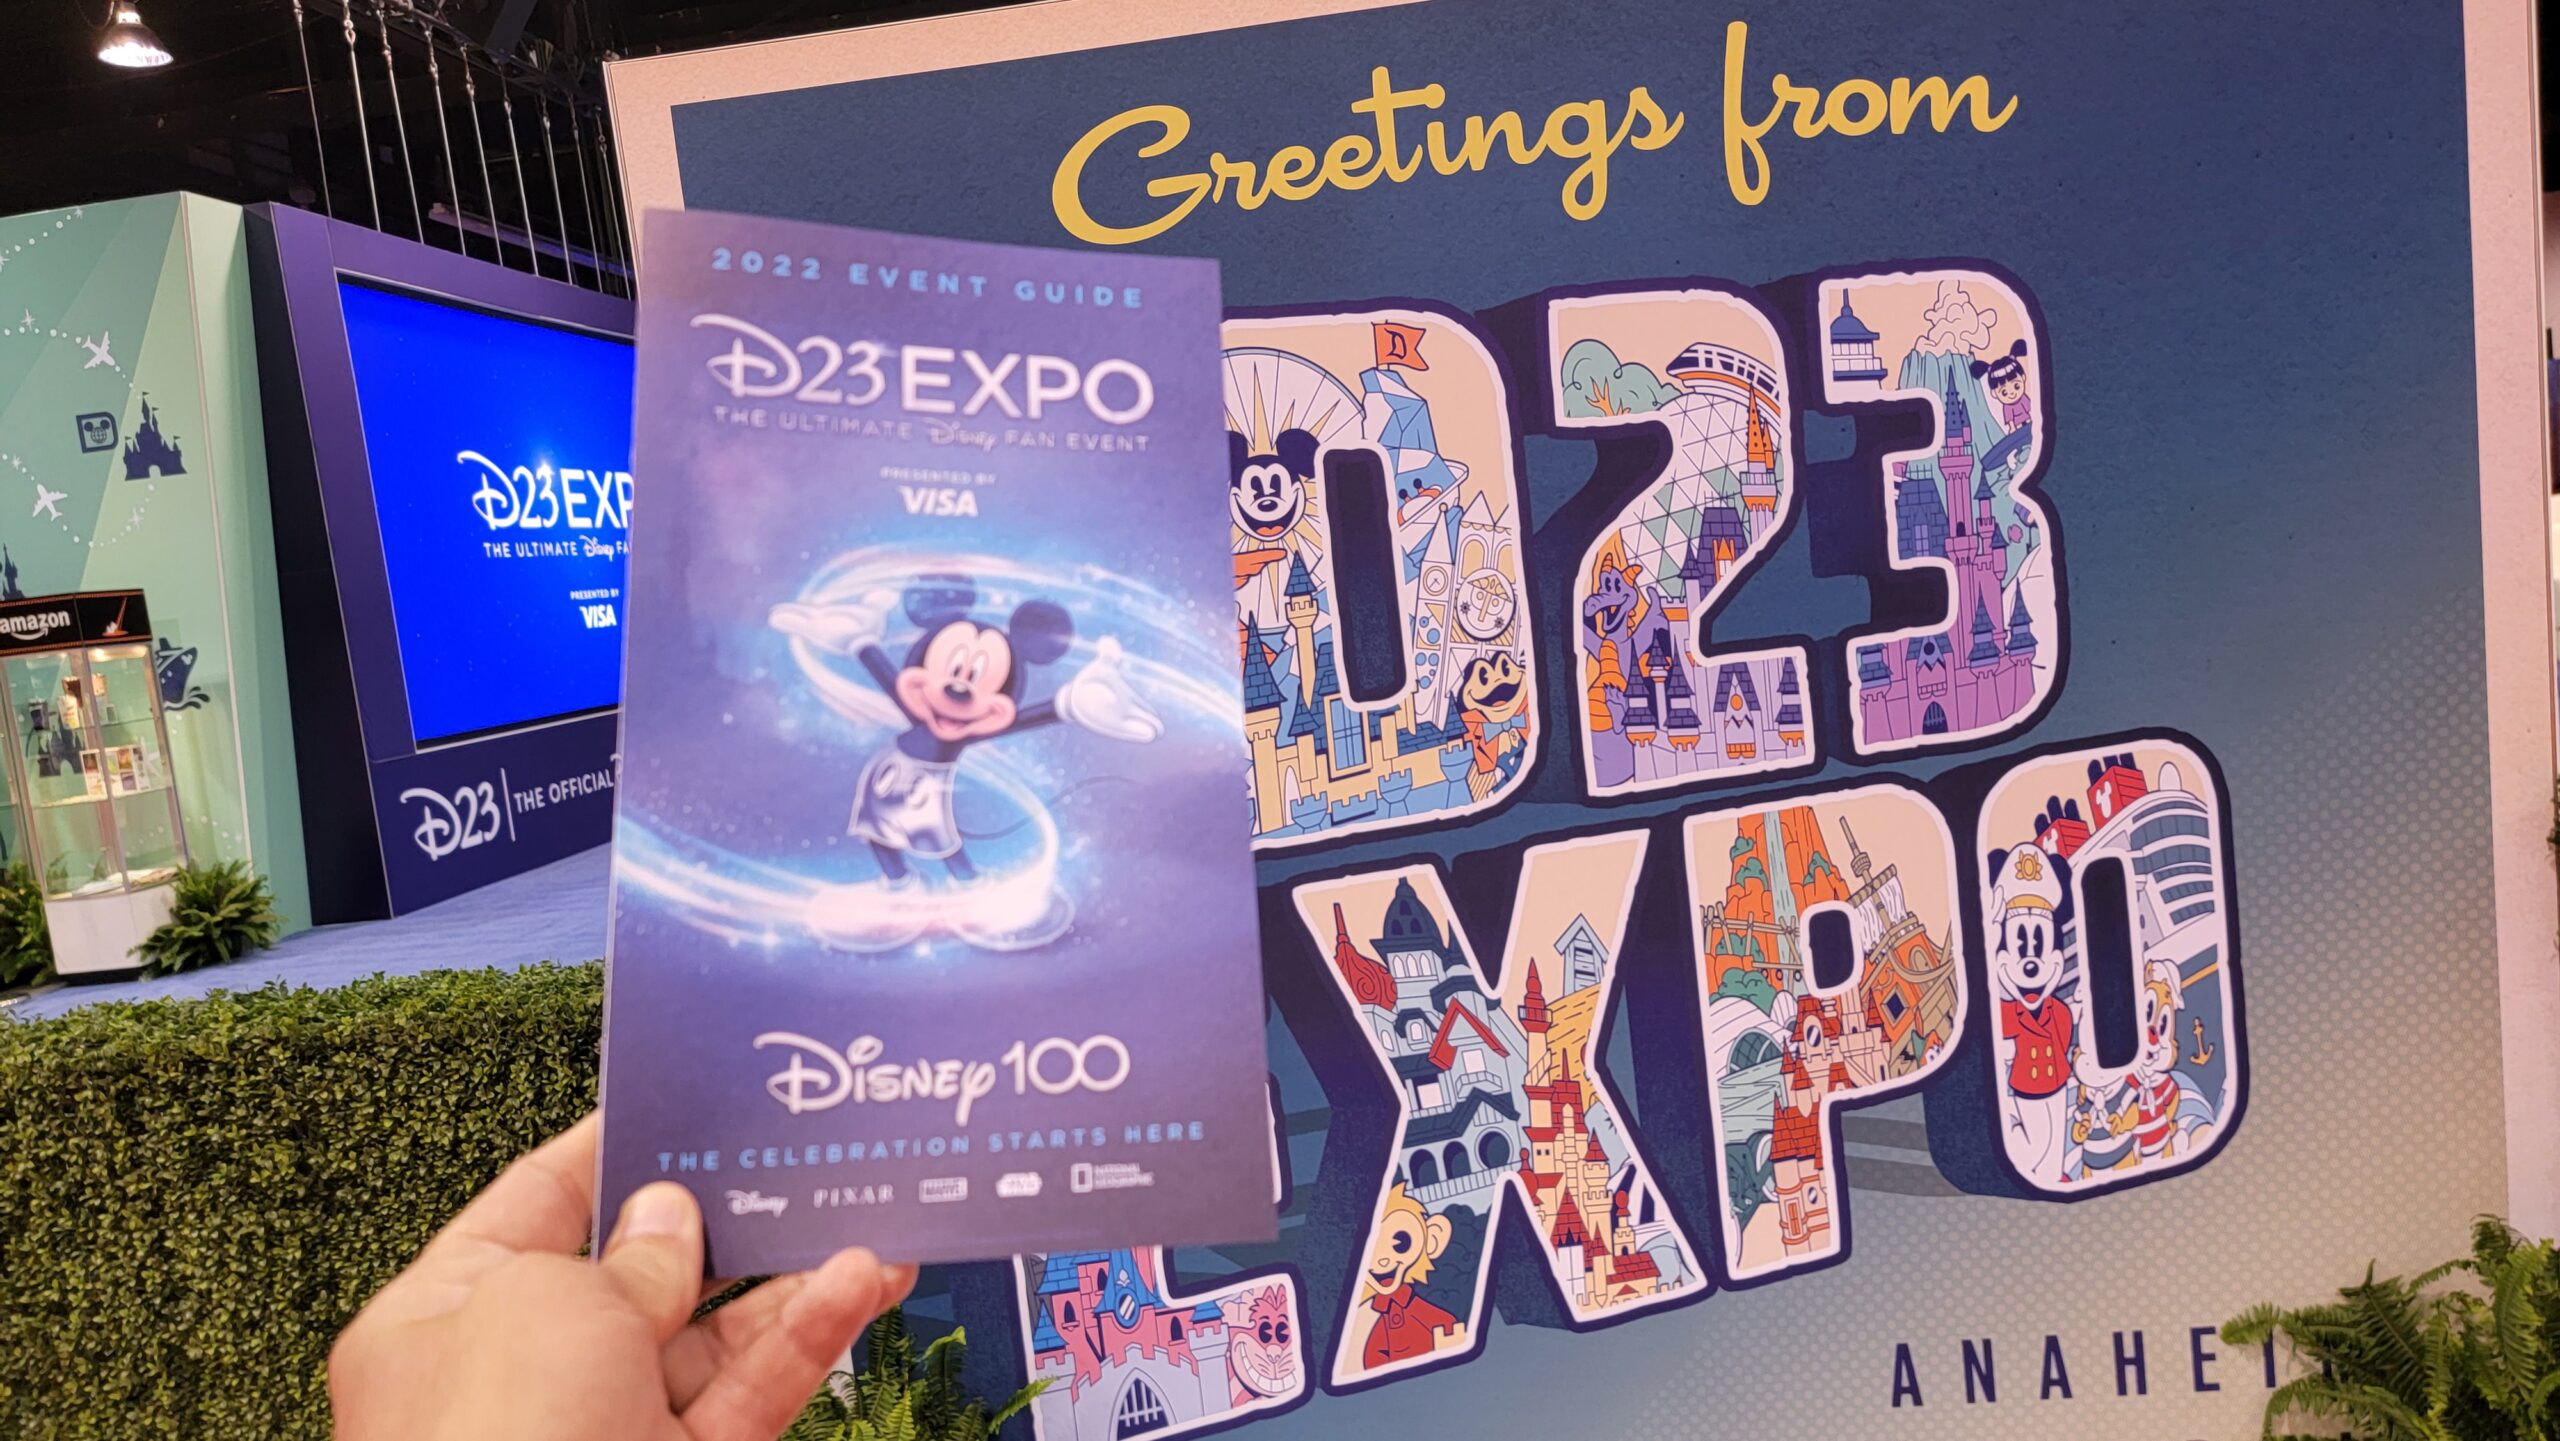 D23: The Ultimate Disney Fan Event coming to Anaheim August 2024